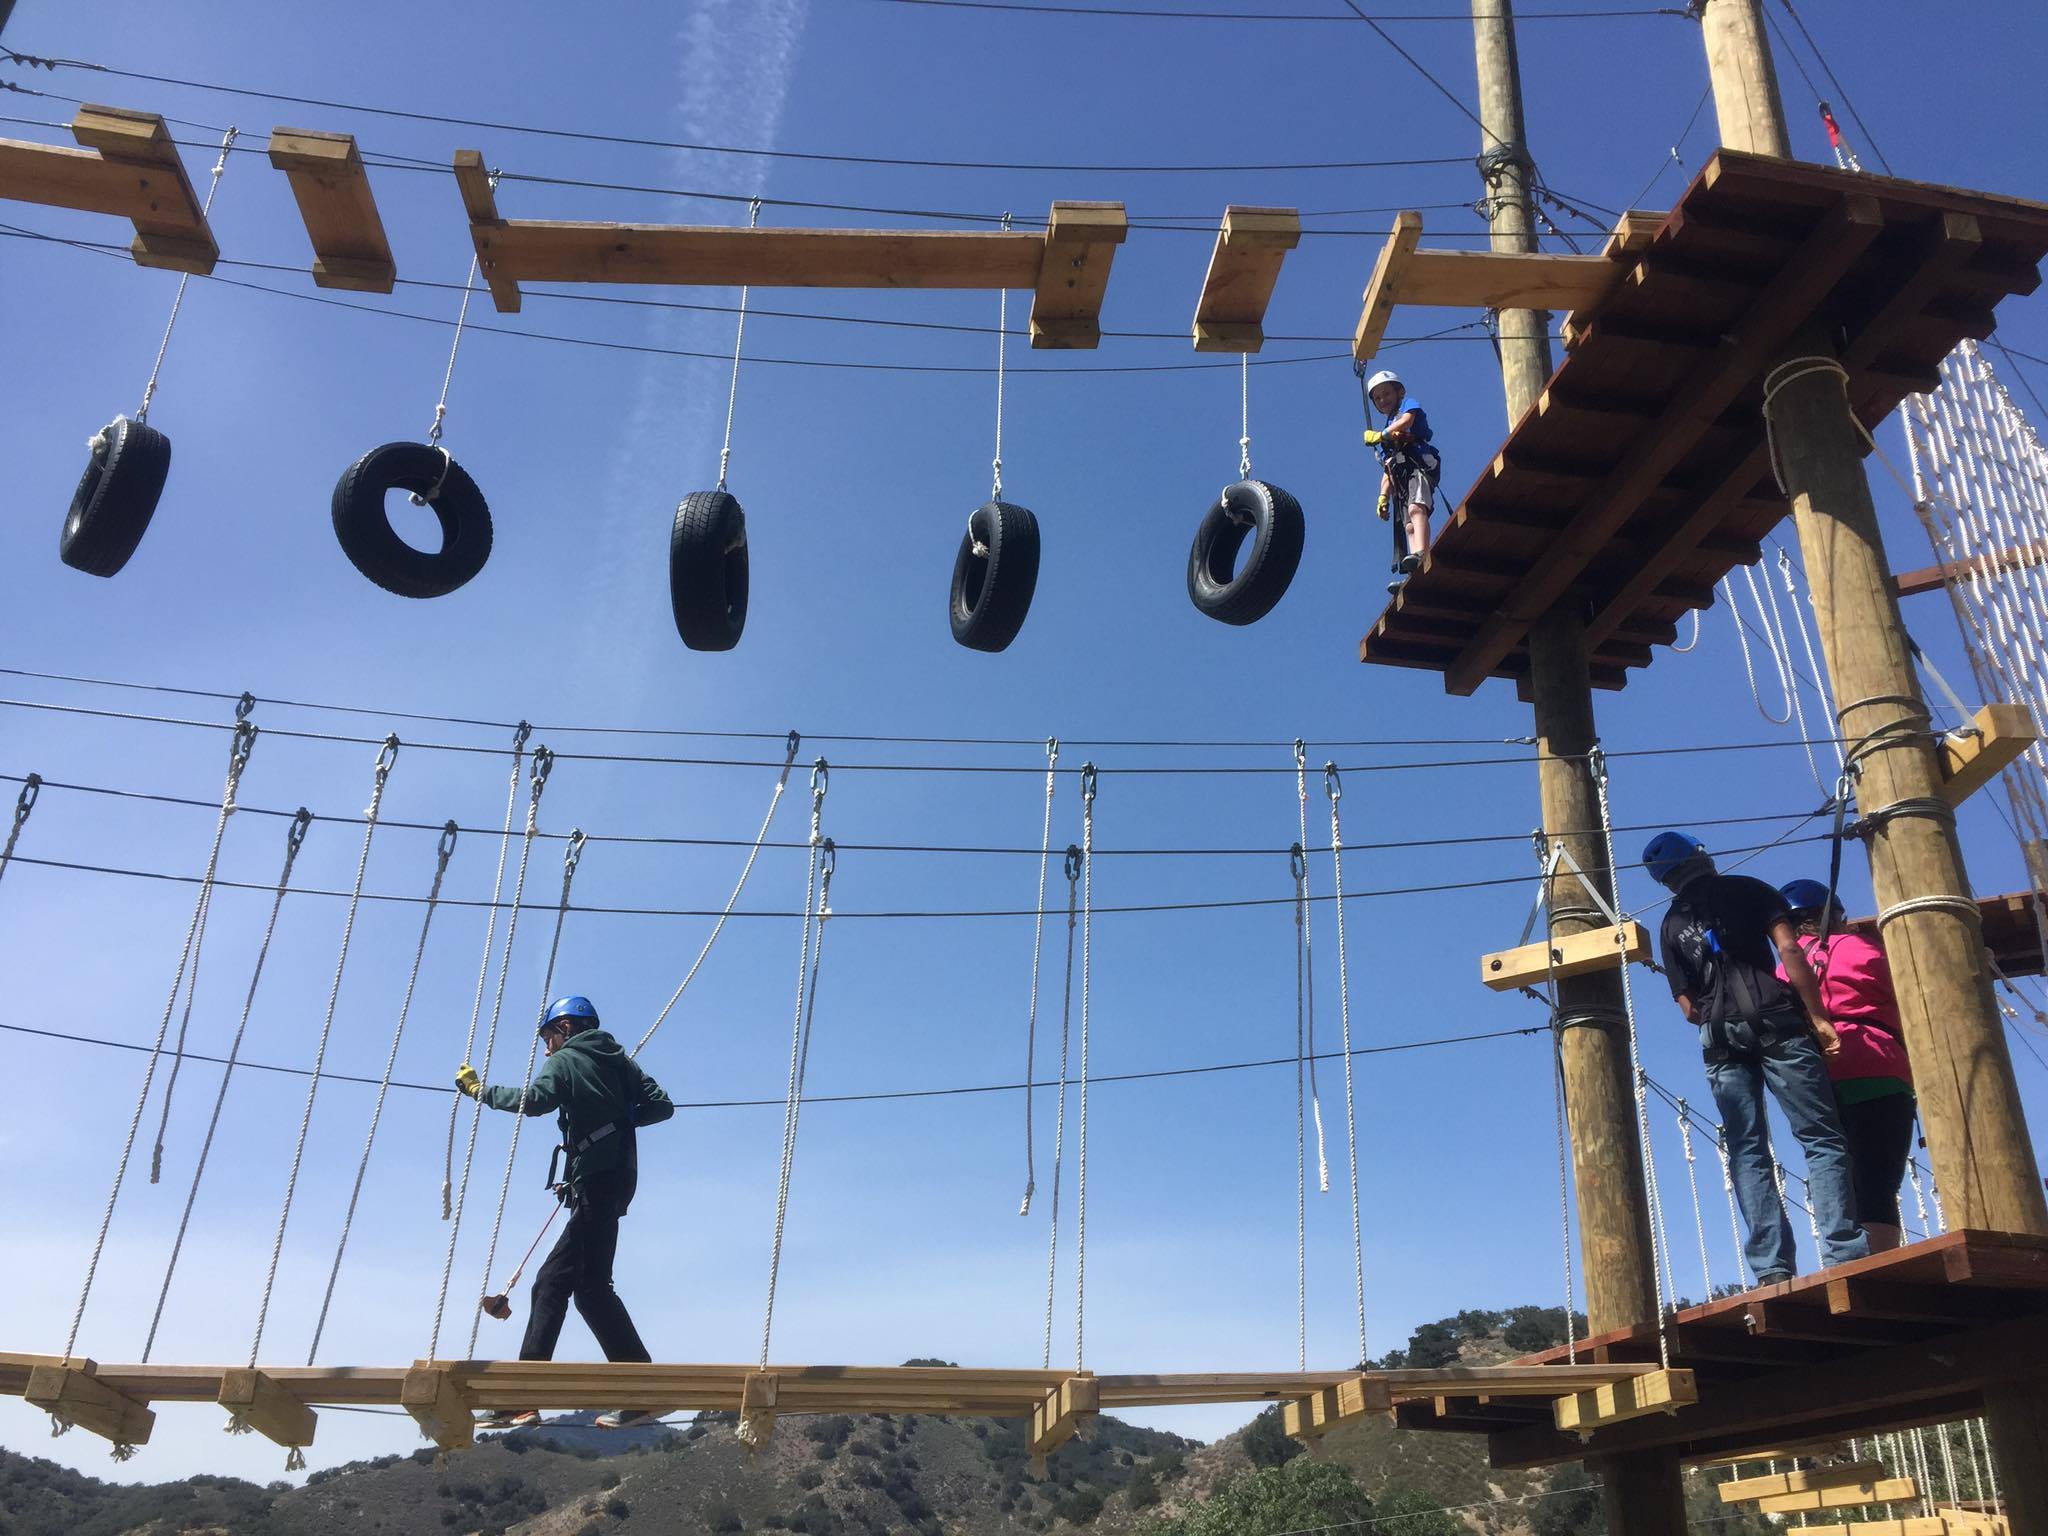 Zip-line project up in the air